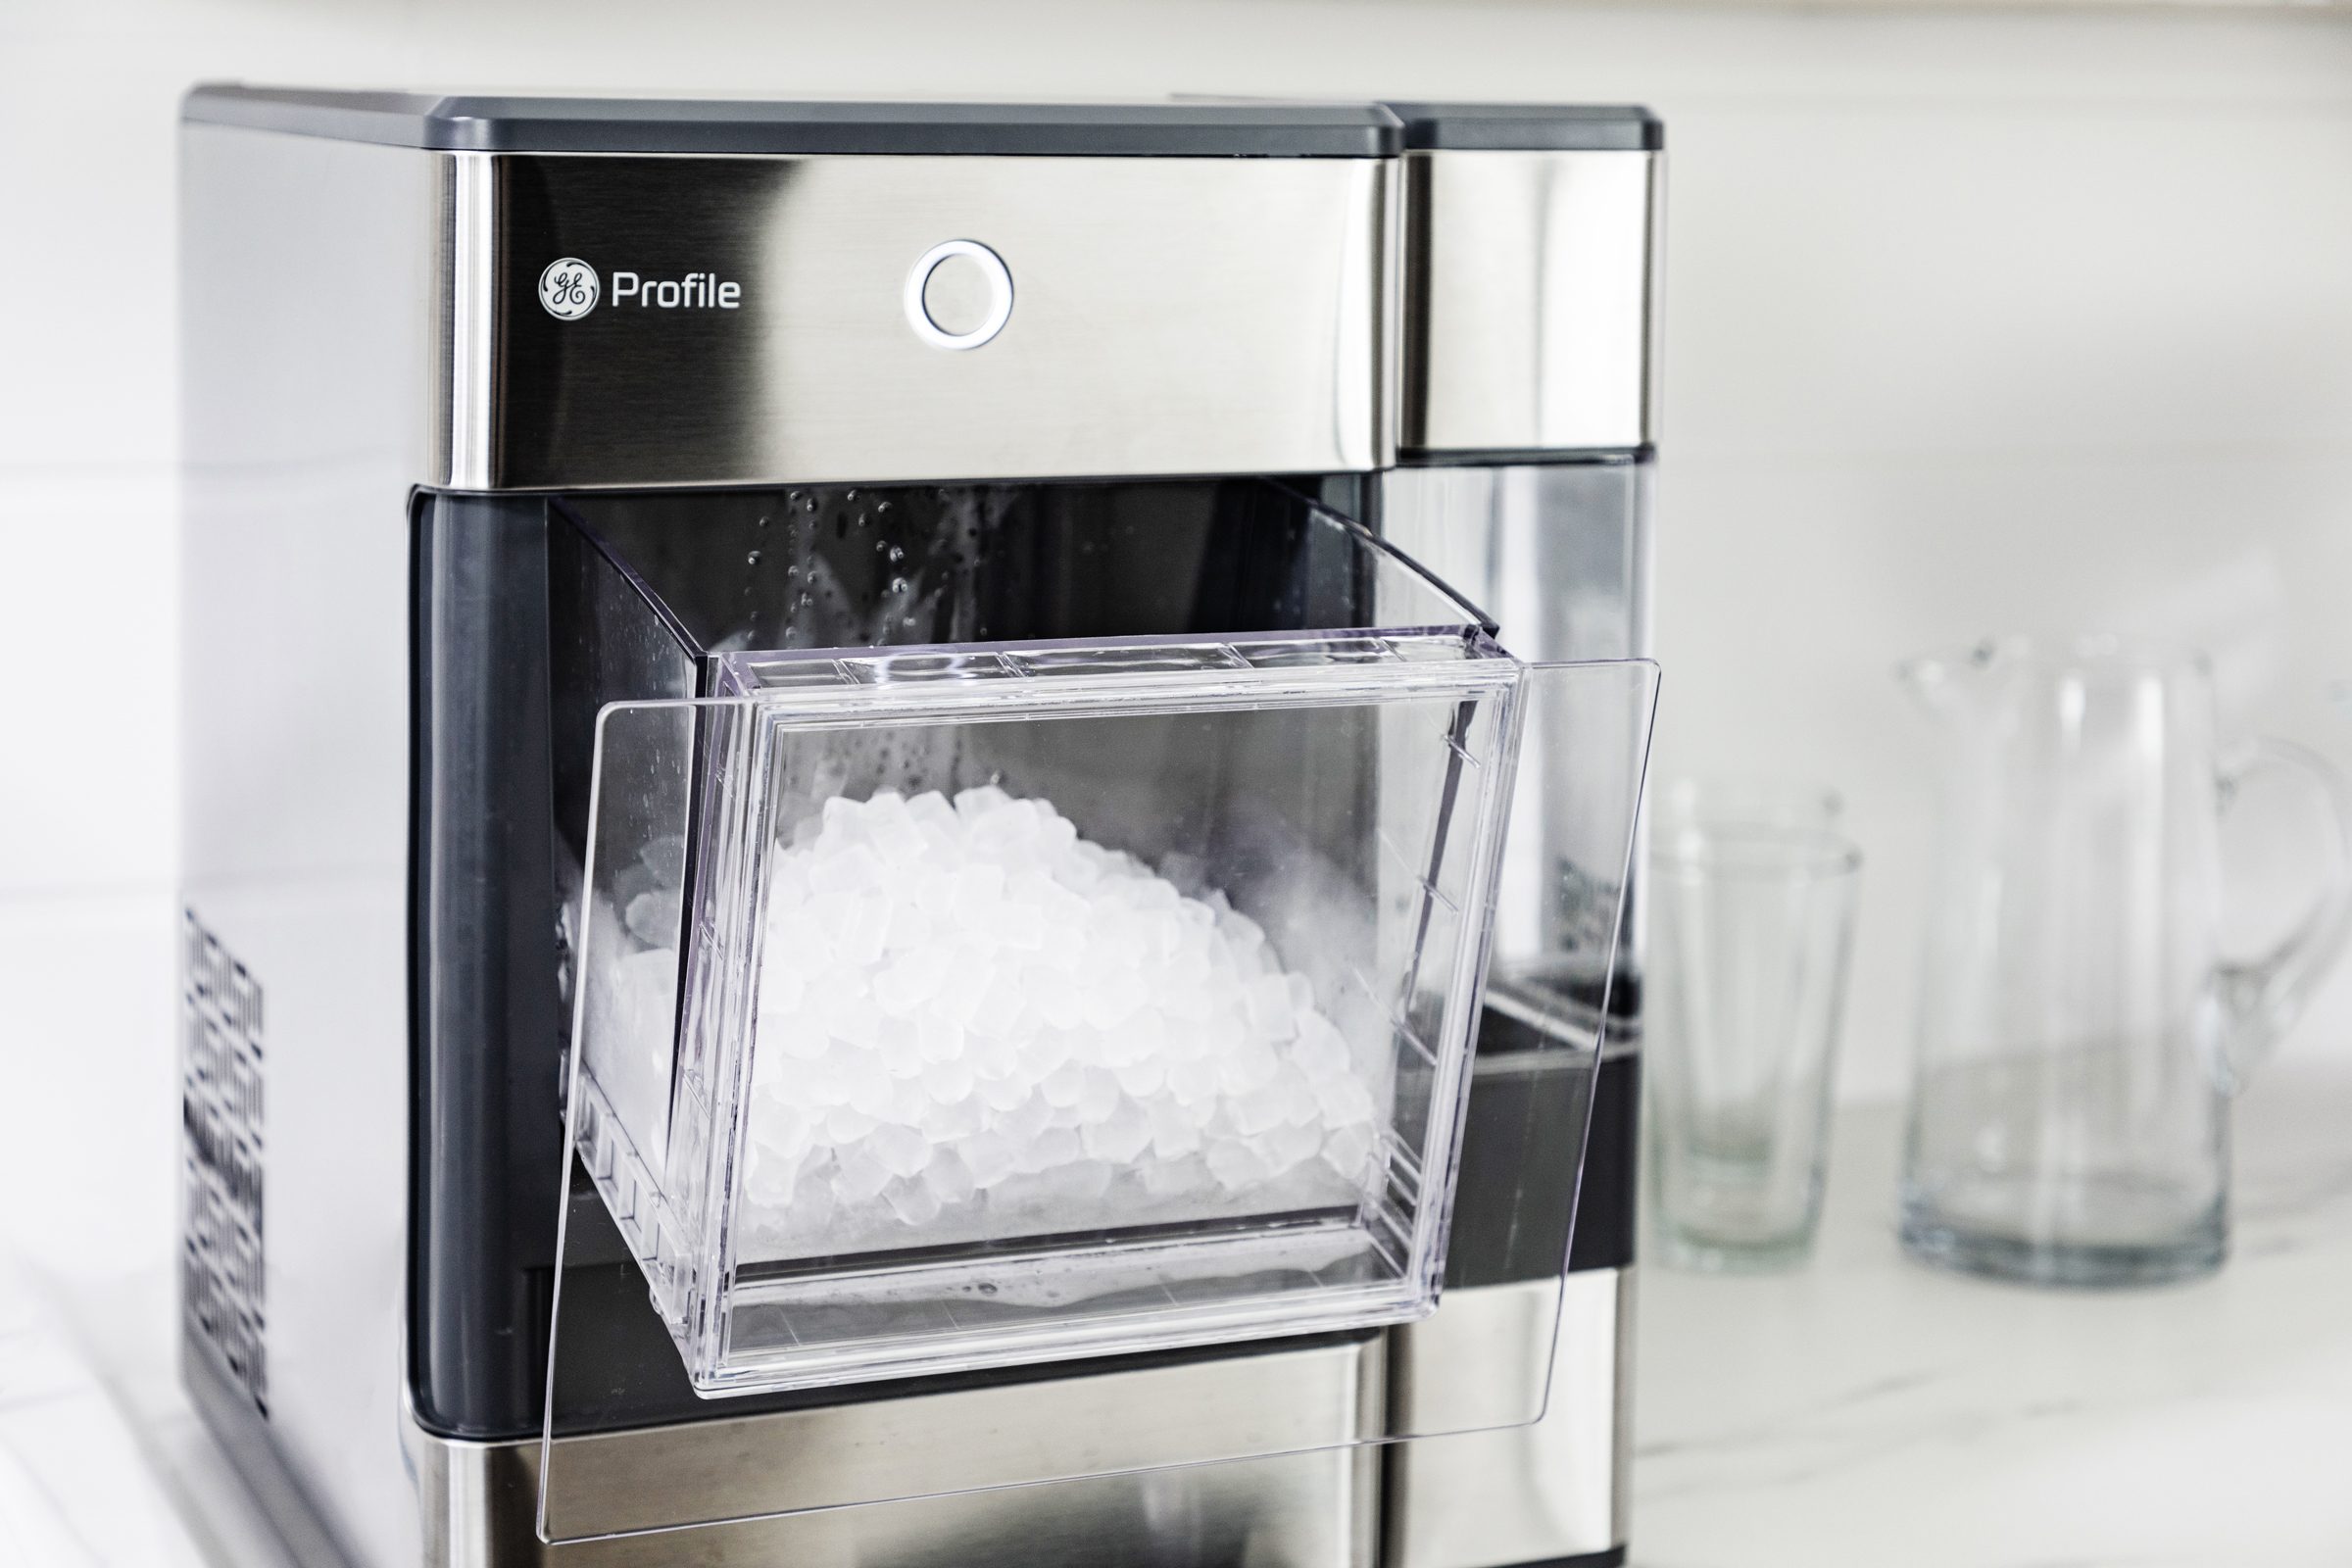 GE Profile Opal Nugget Ice Maker filled with ice on a kitchen counter